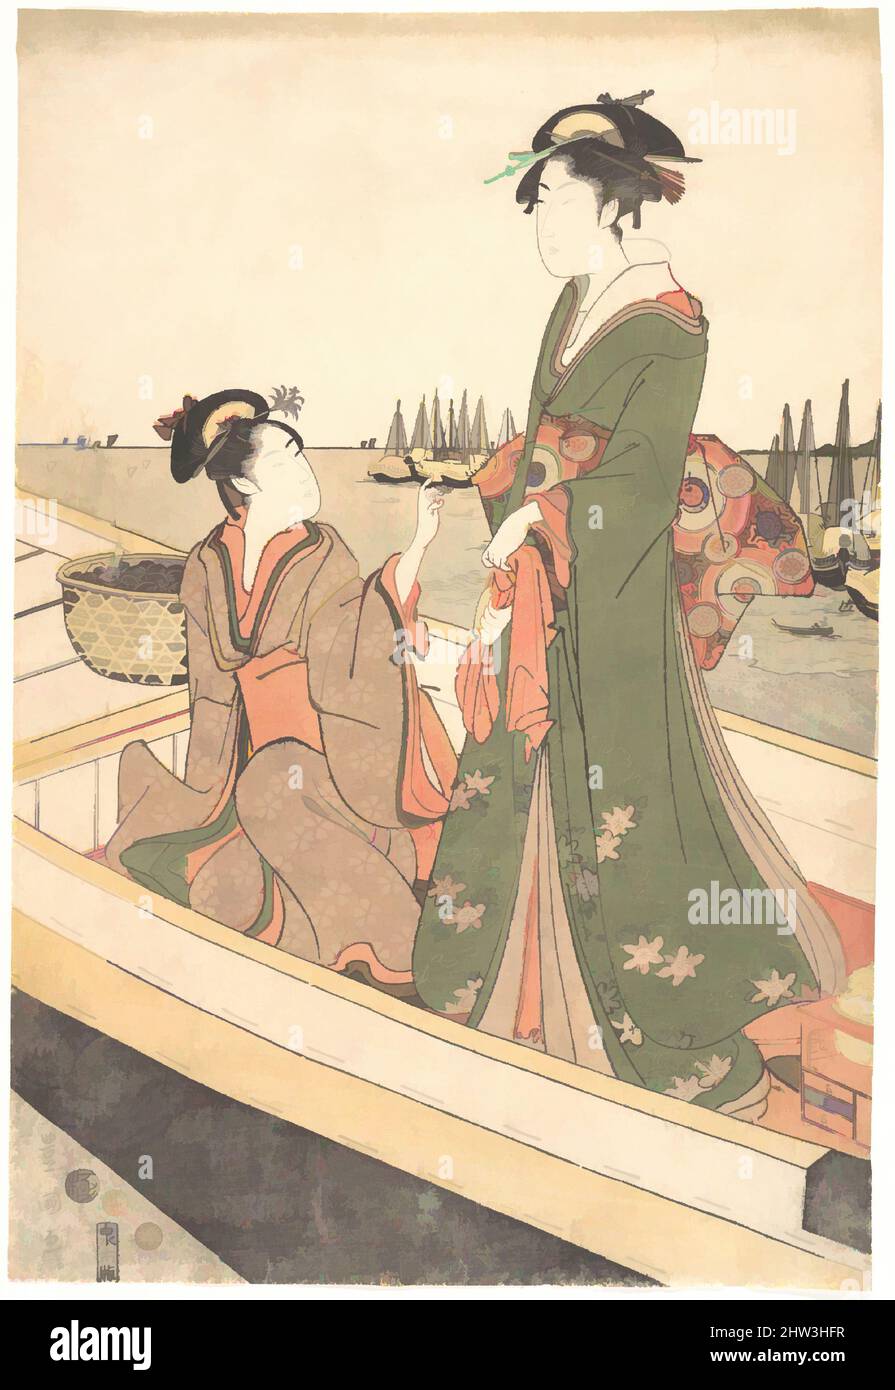 Art inspired by Two Women in a Boat; One, Holding a Basket of Mussels, Edo period (1615–1868), ca. 1798, Japan, Polychrome woodblock print; ink and color on paper, H. 14 5/8 in. (37.1 cm); W. 9 7/8 in. (25.1 cm), Prints, Utagawa Toyokuni I (Japanese, 1769–1825, Classic works modernized by Artotop with a splash of modernity. Shapes, color and value, eye-catching visual impact on art. Emotions through freedom of artworks in a contemporary way. A timeless message pursuing a wildly creative new direction. Artists turning to the digital medium and creating the Artotop NFT Stock Photo